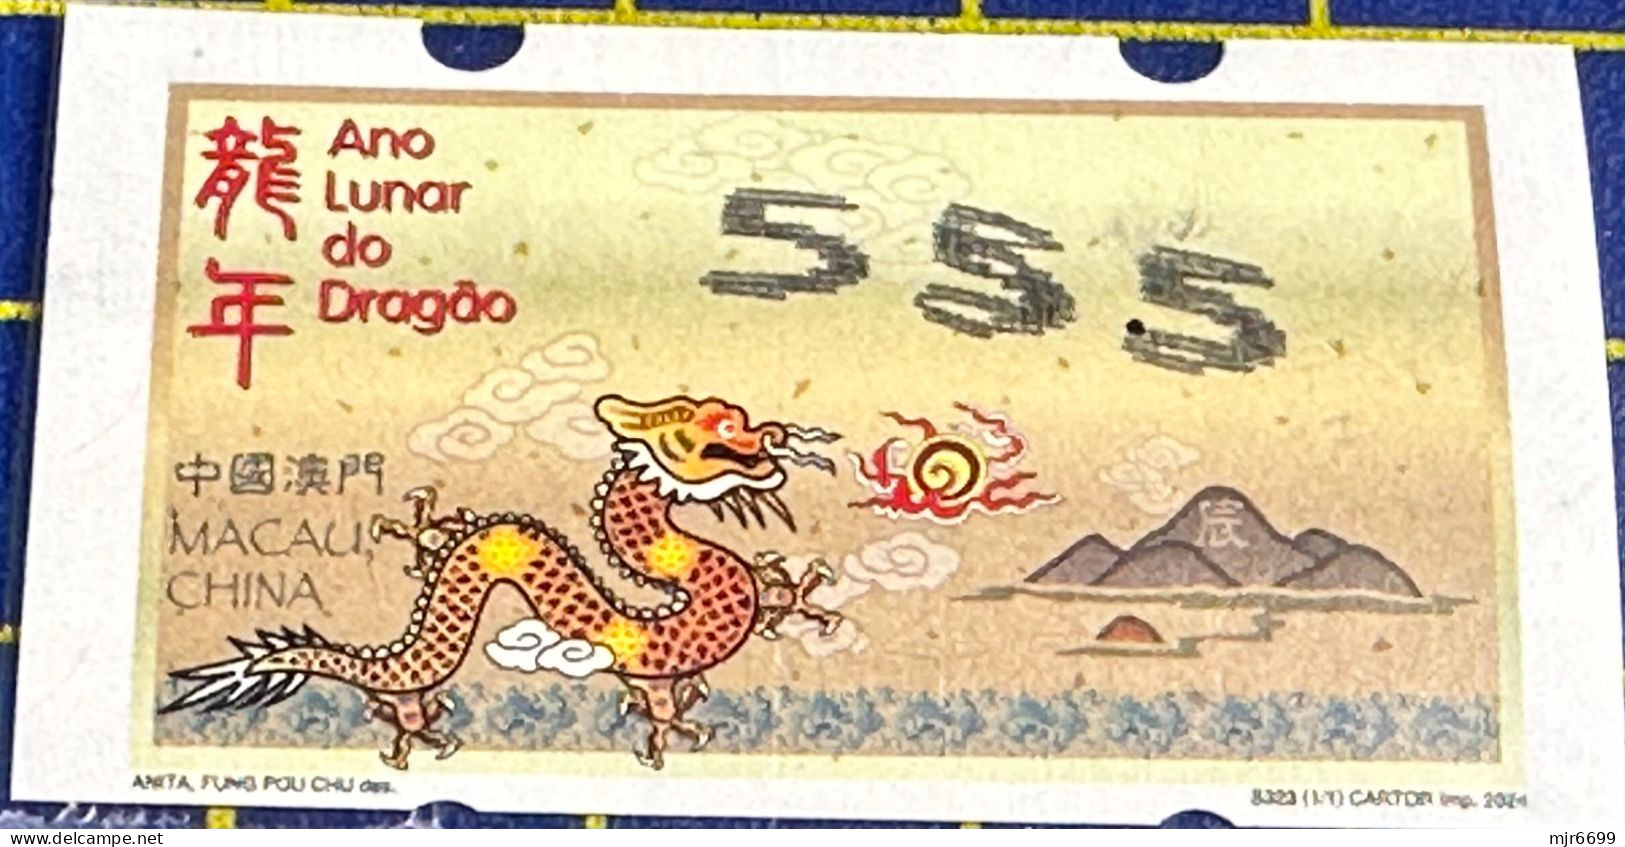 2024 LUNAR NEW YEAR OF THE DRAGON NAGLER MACHINE ATM LABELS WITH 55.5PATACAS & DANCING VALUE - Distribuidores